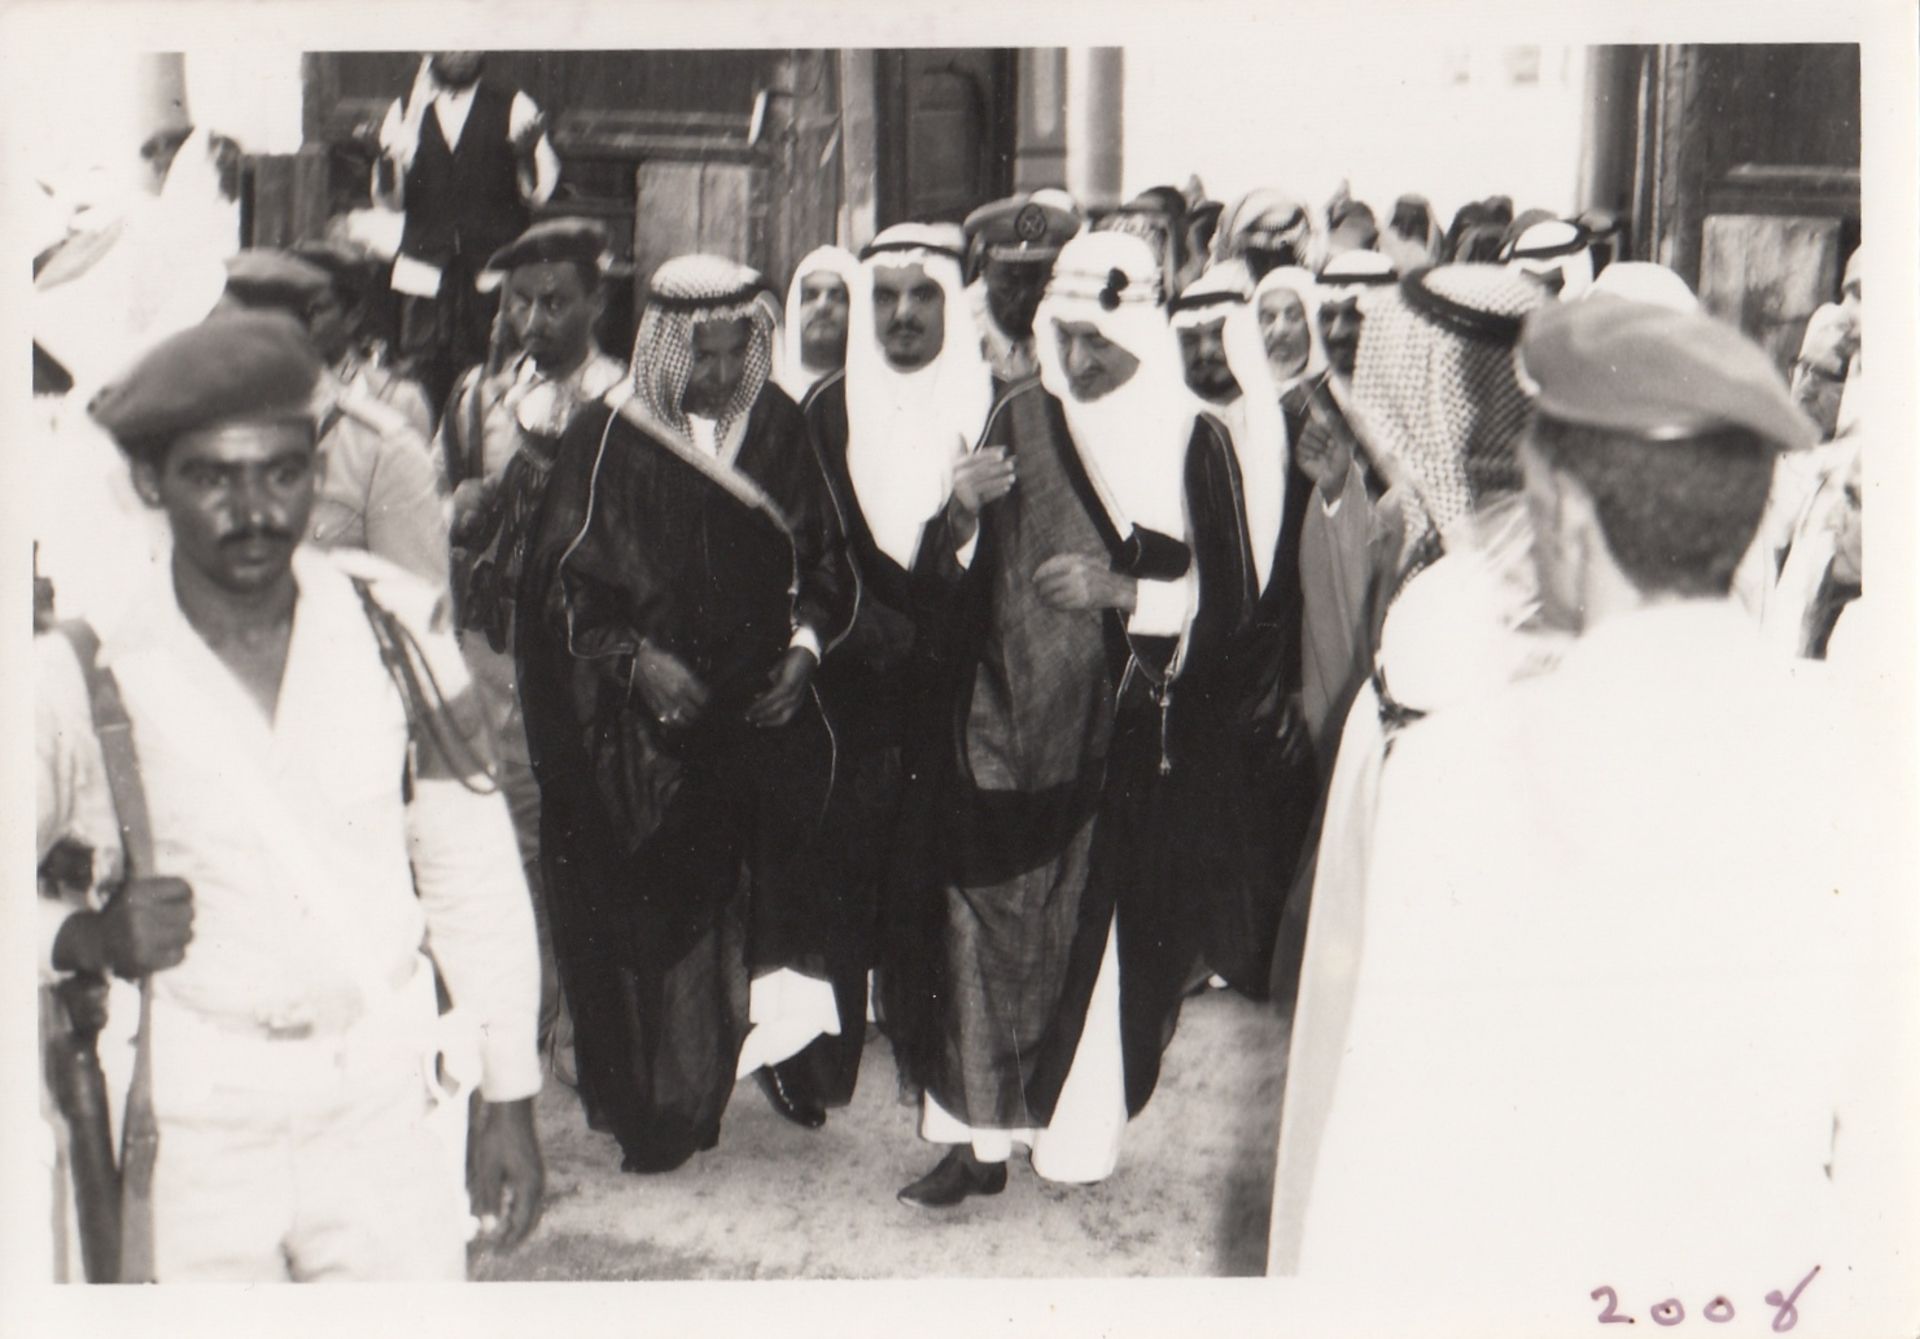 A COLLECTION OF PHOTOGRAPHS OF HIS MAJESTY KING FAISAL BIN ABDUL AZIZ VISITING THE GRAND MOSQUES OF - Image 18 of 24